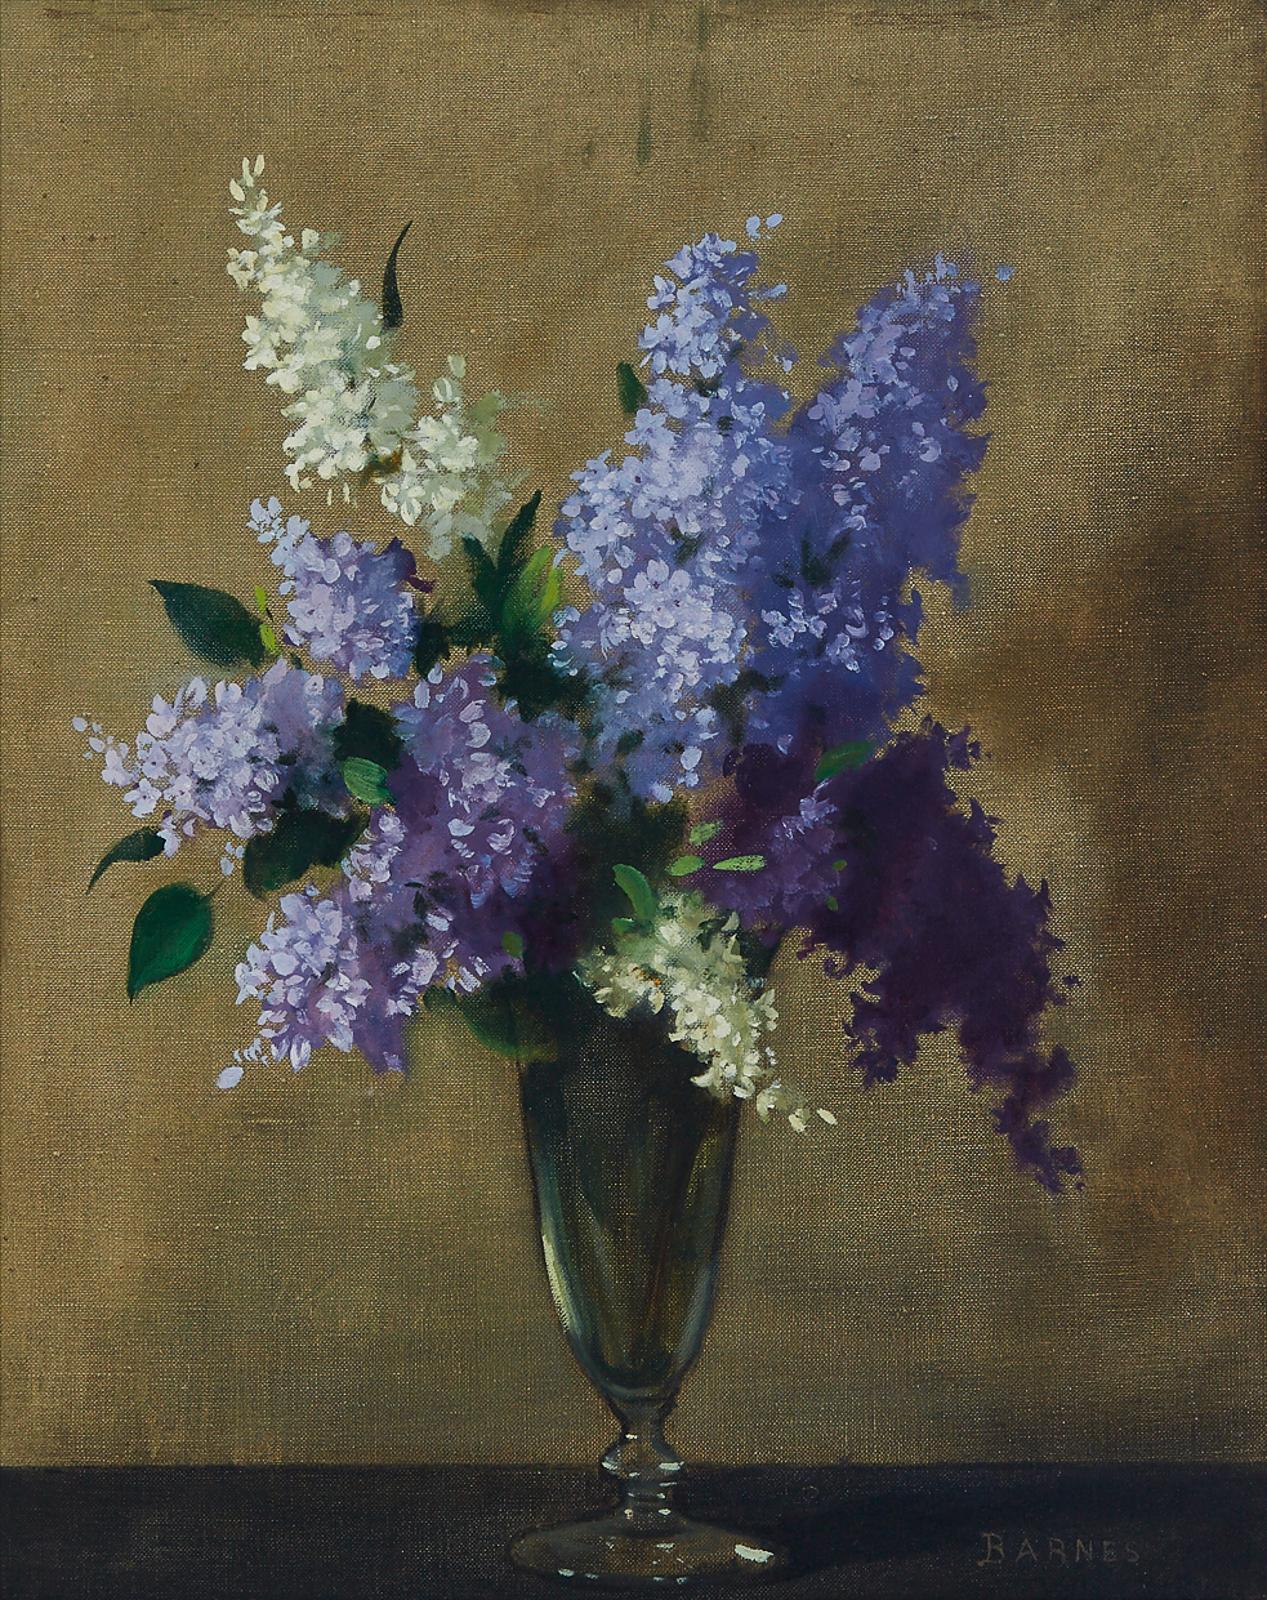 Archibald George Barnes (1887-1972) - Lilacs In A Glass Vase